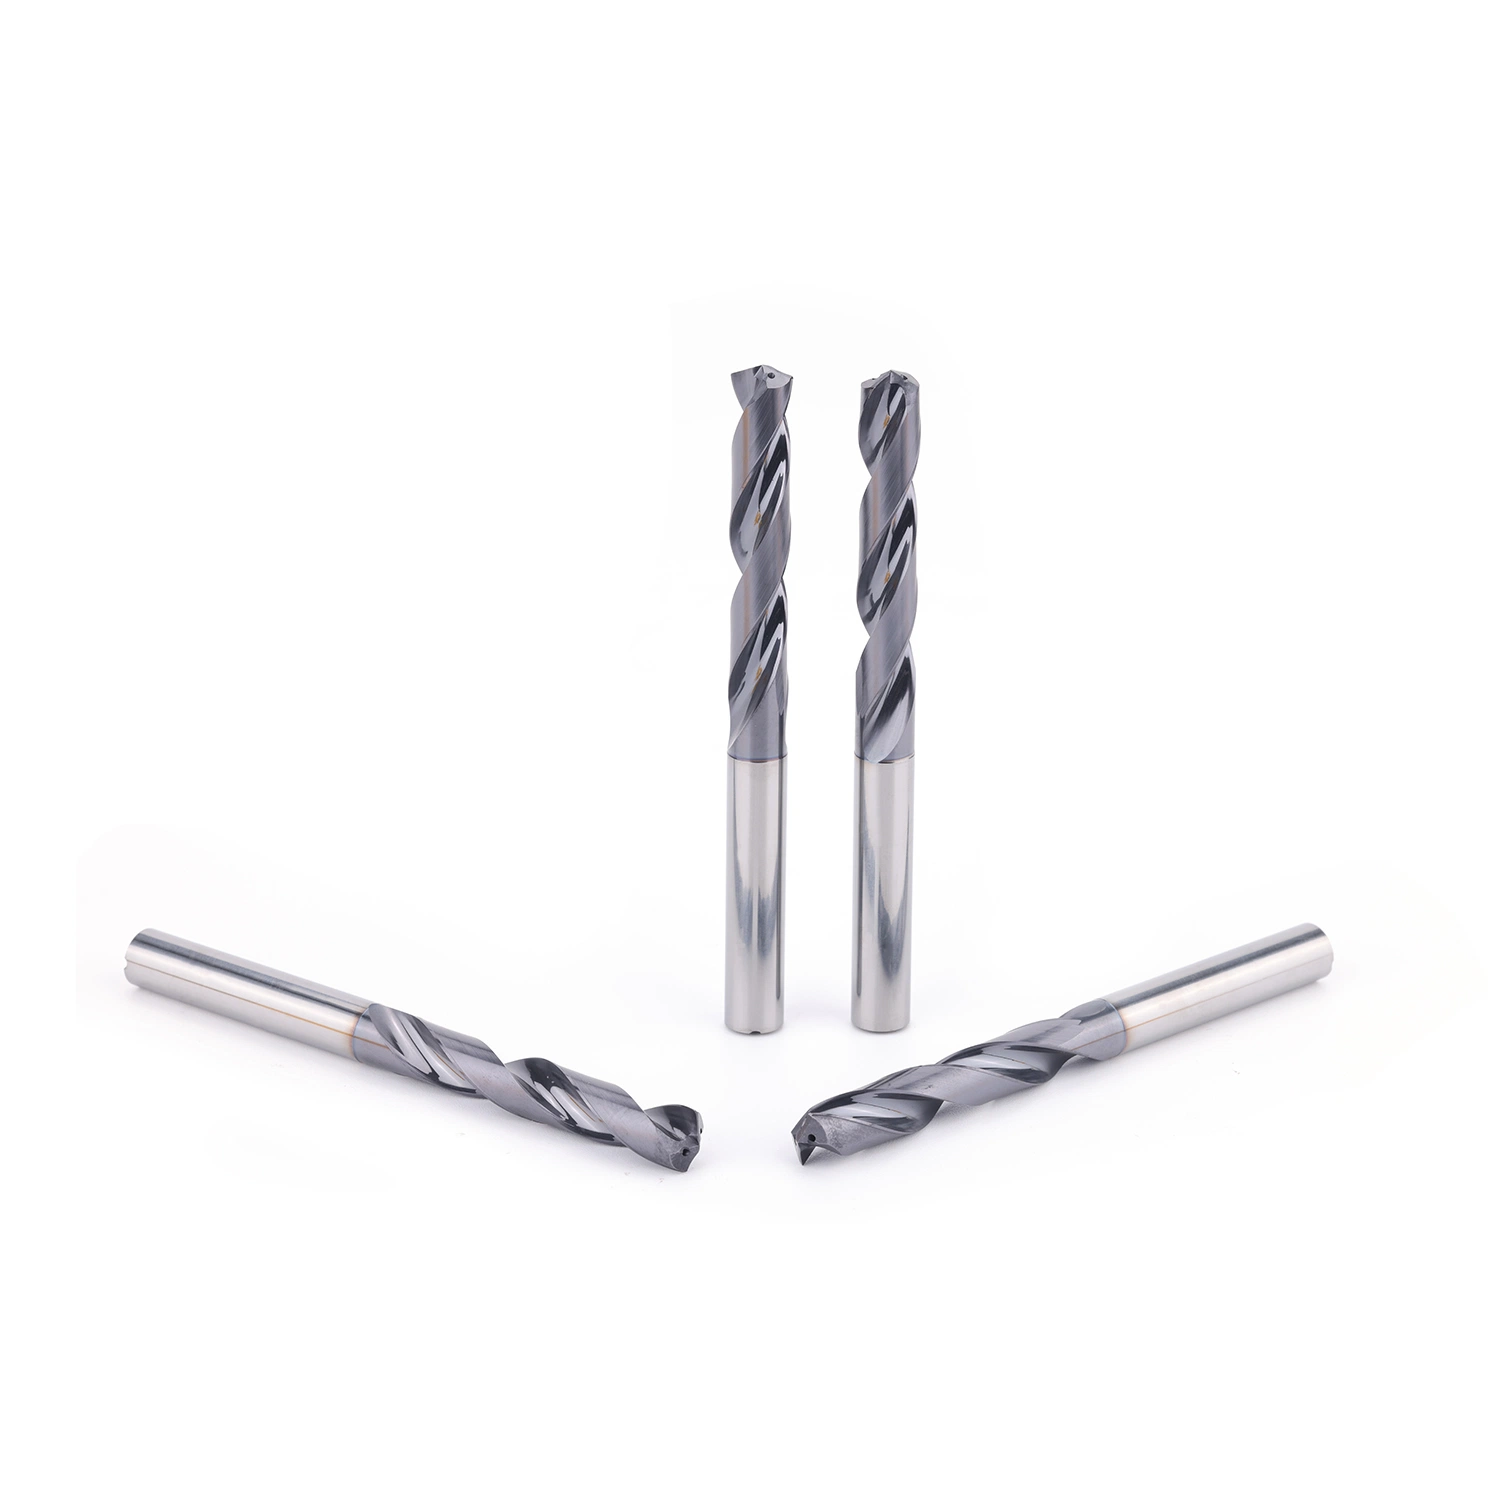 Twist Drill Bit for Stainless Steel Power Tools